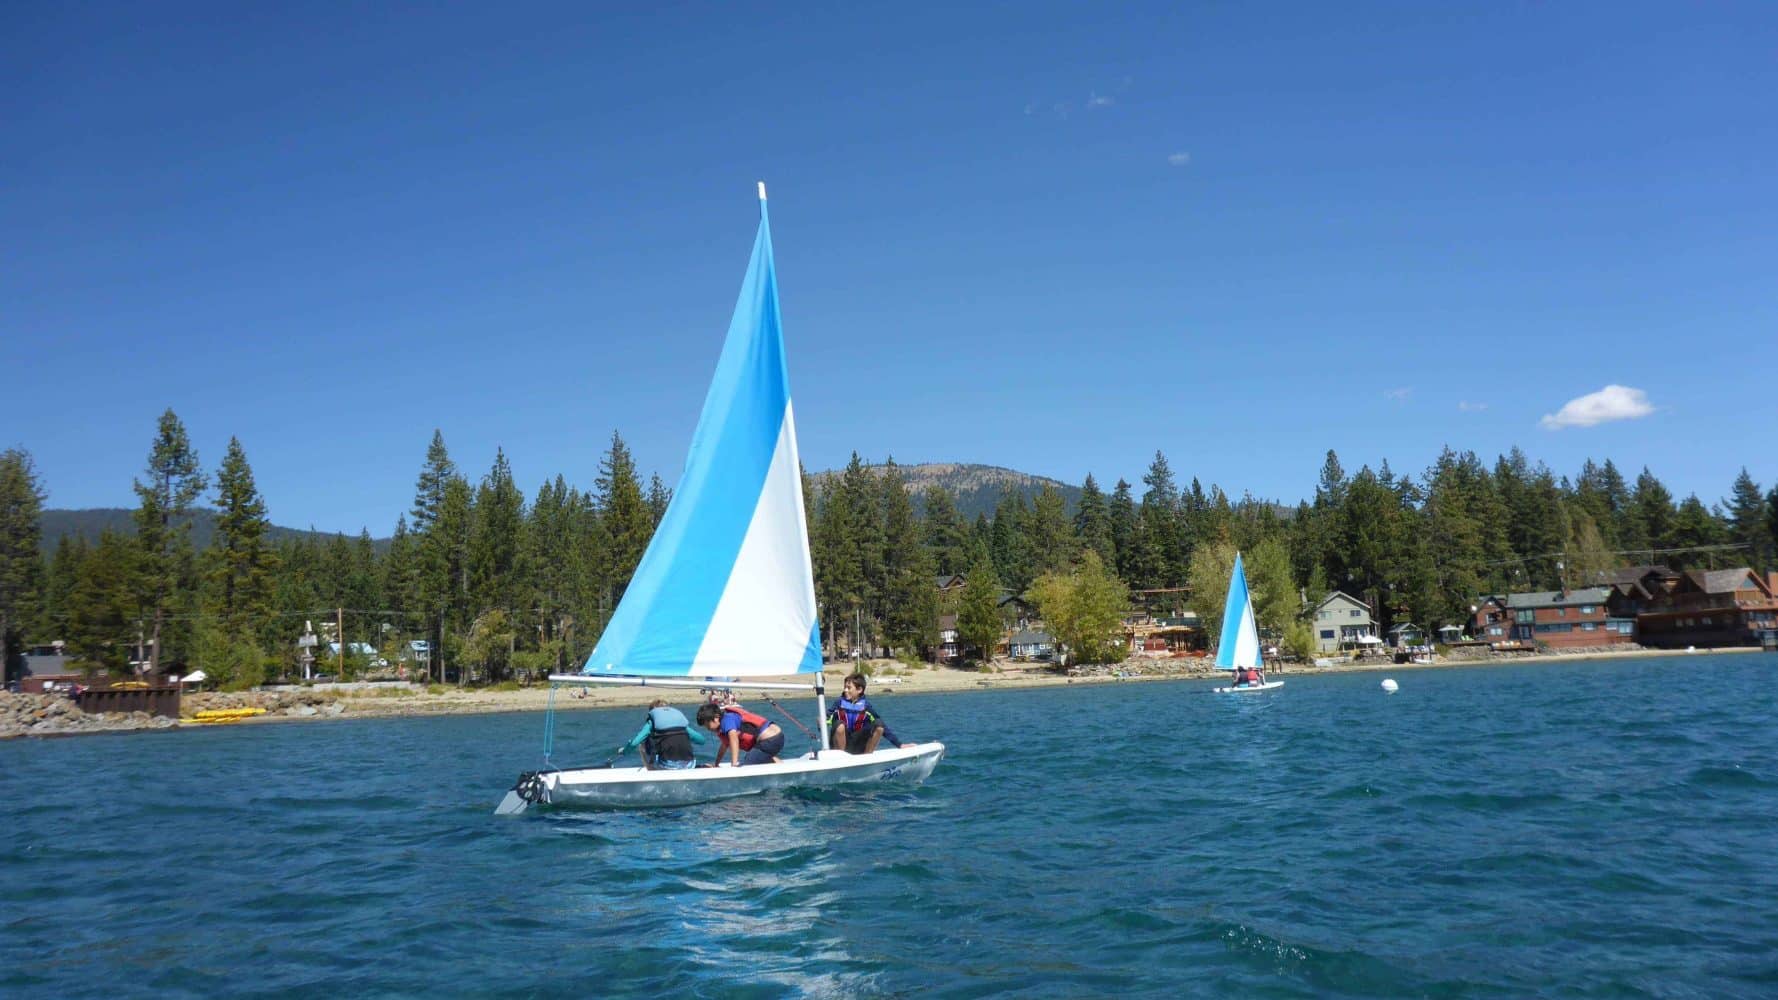 students in the ocean on small sailboats